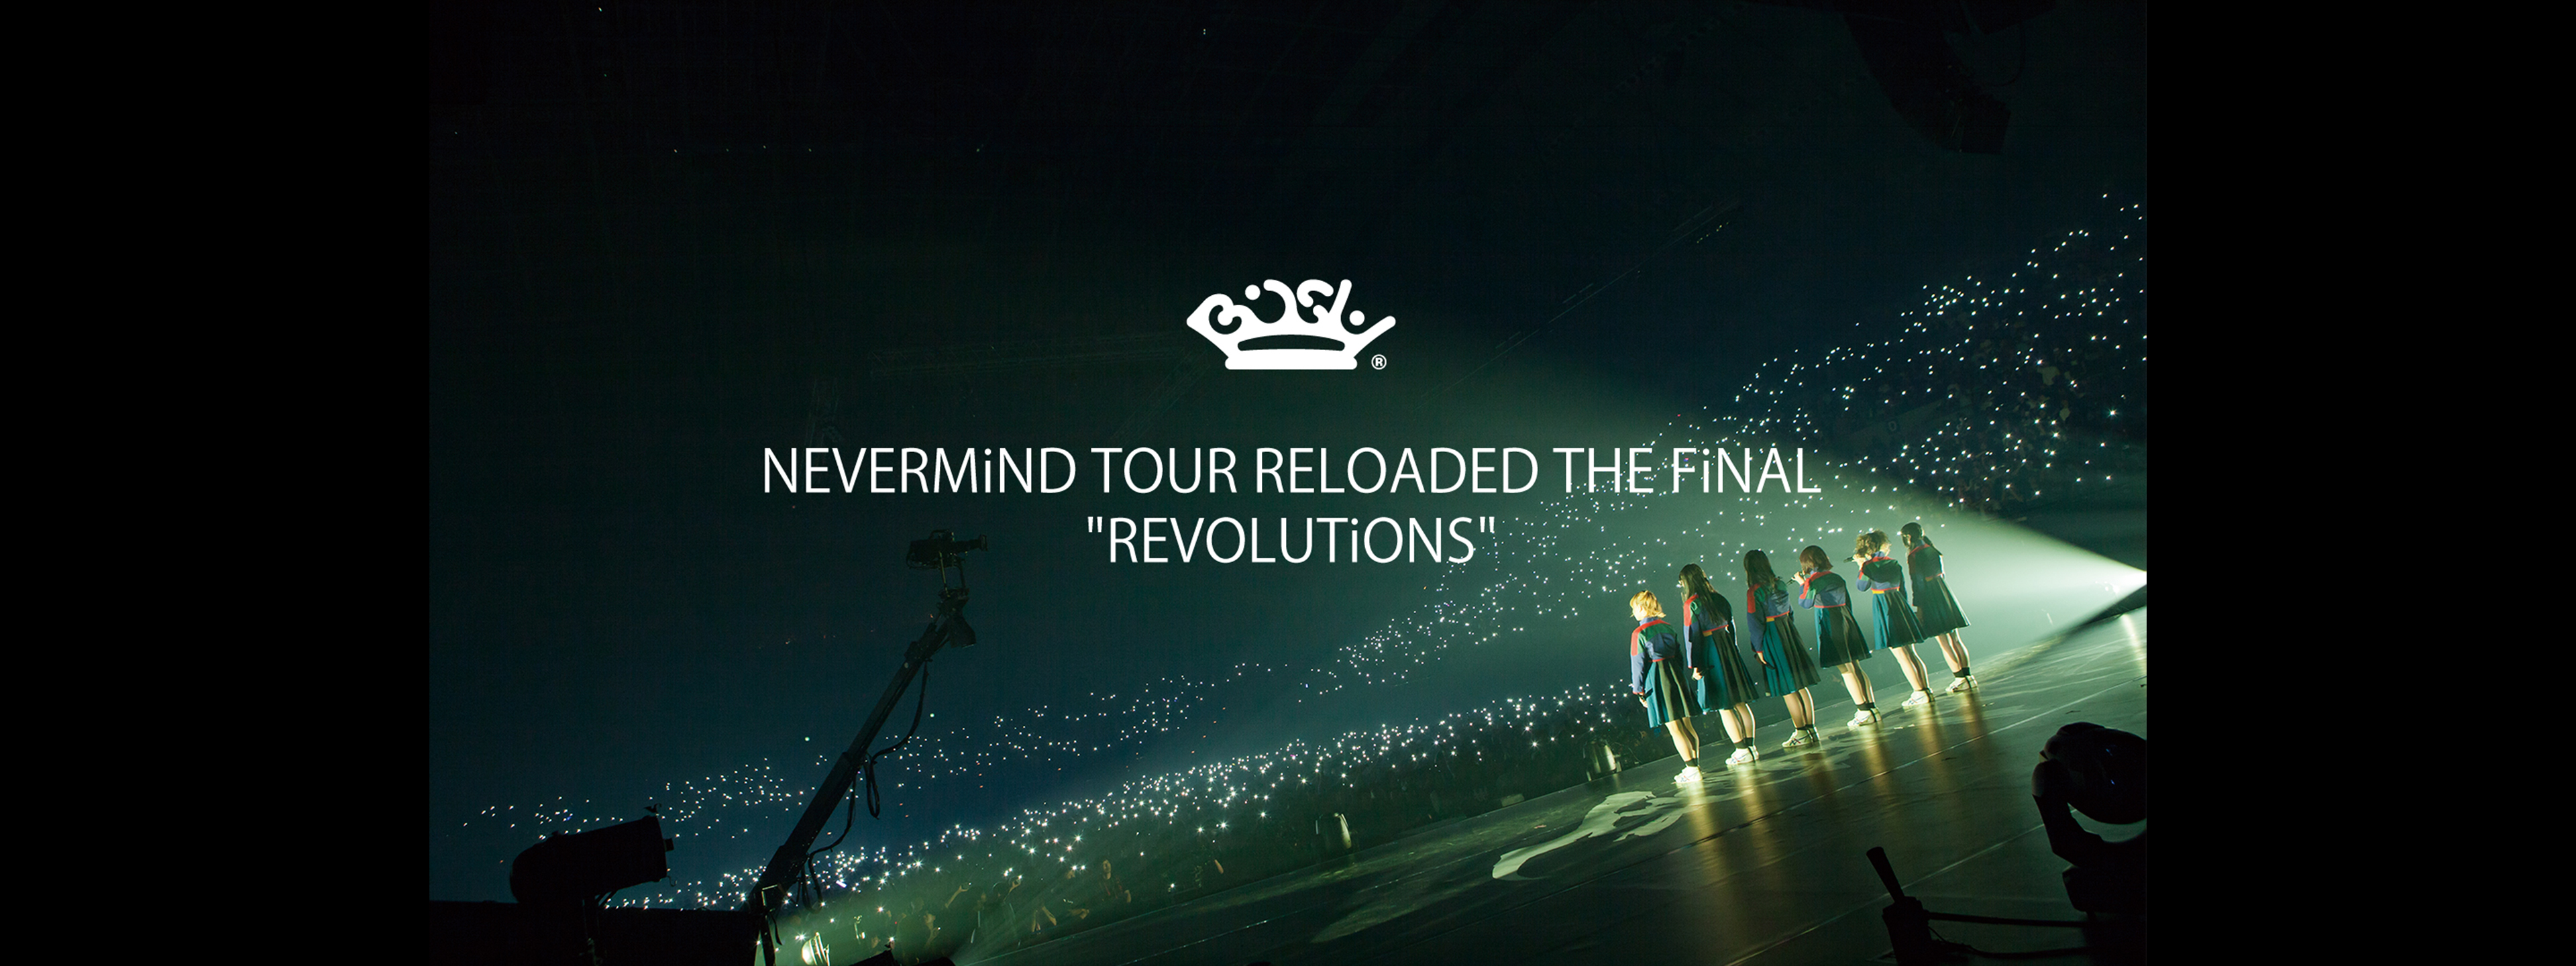 BiSH/NEVERMiND TOUR RELOADED THE FiNAL - ミュージック